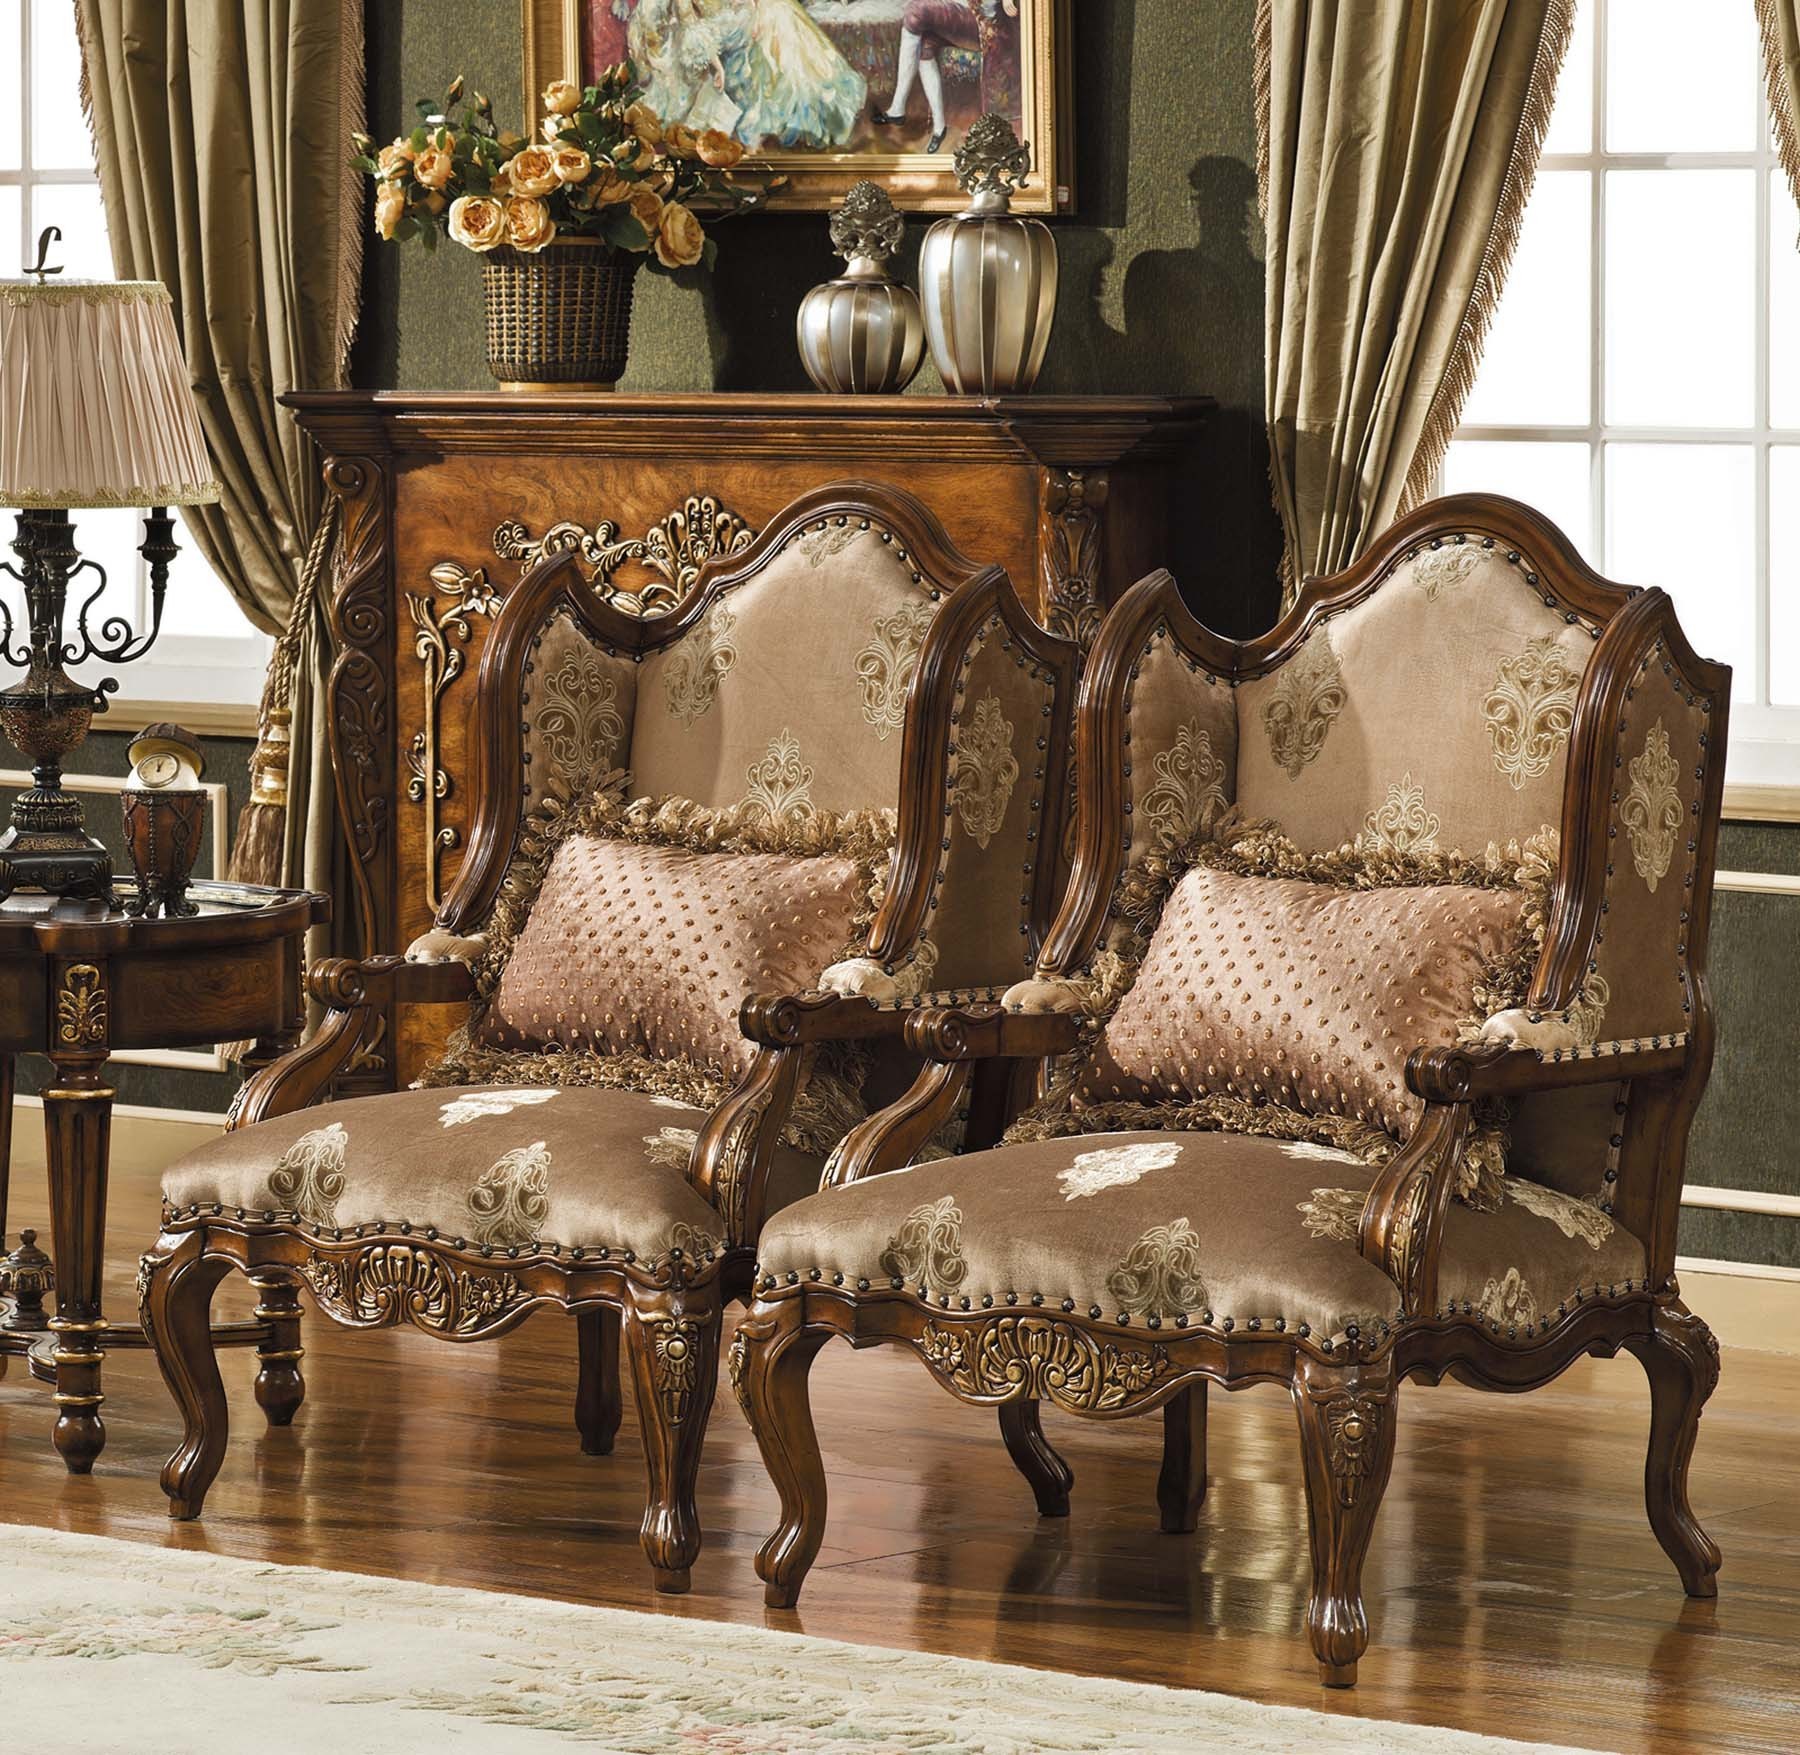 Gloucester Occasional Chair shown in Antique Walnut finish